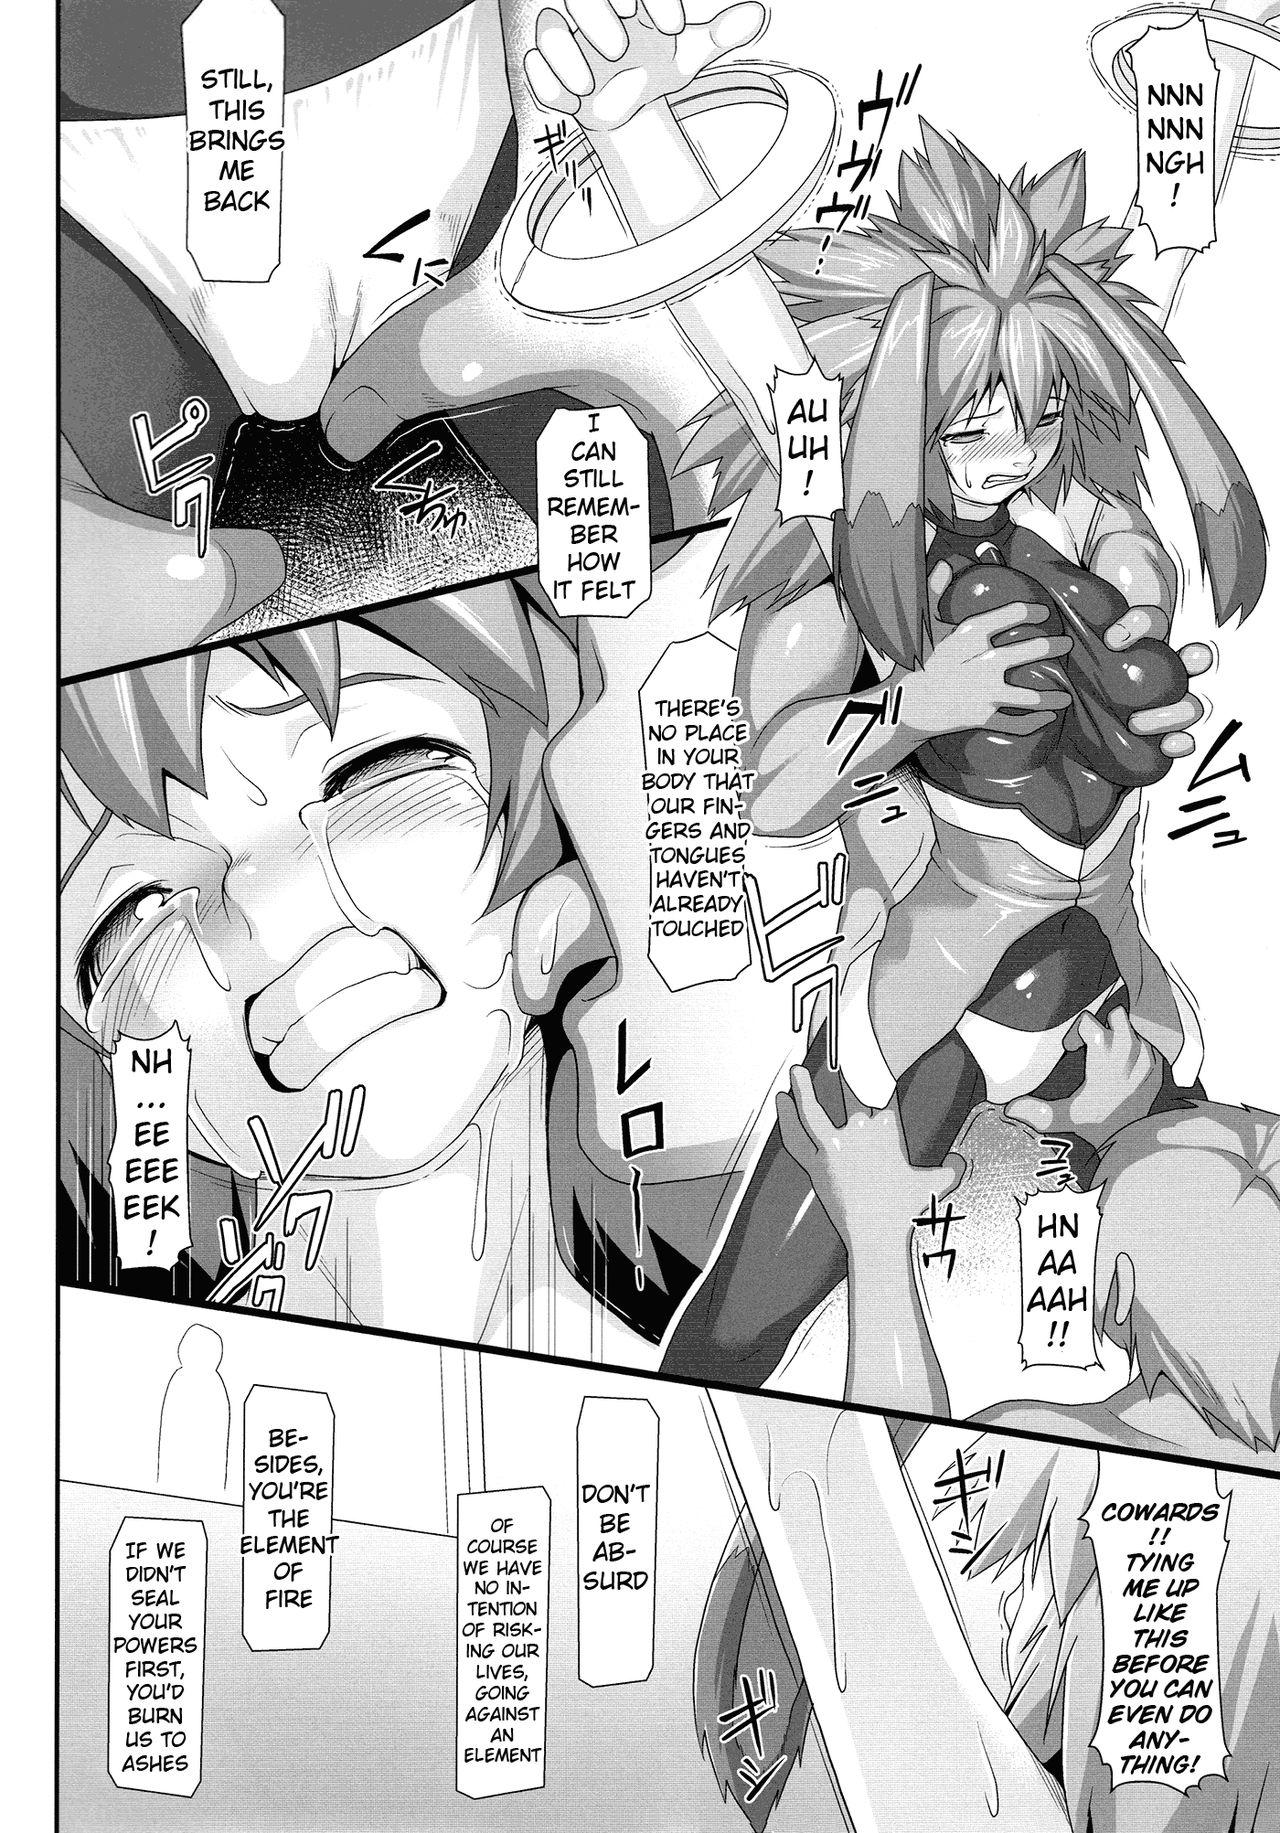 Fat Ass Seraphic Gate 4 - Xenogears Petite Teenager - Page 5